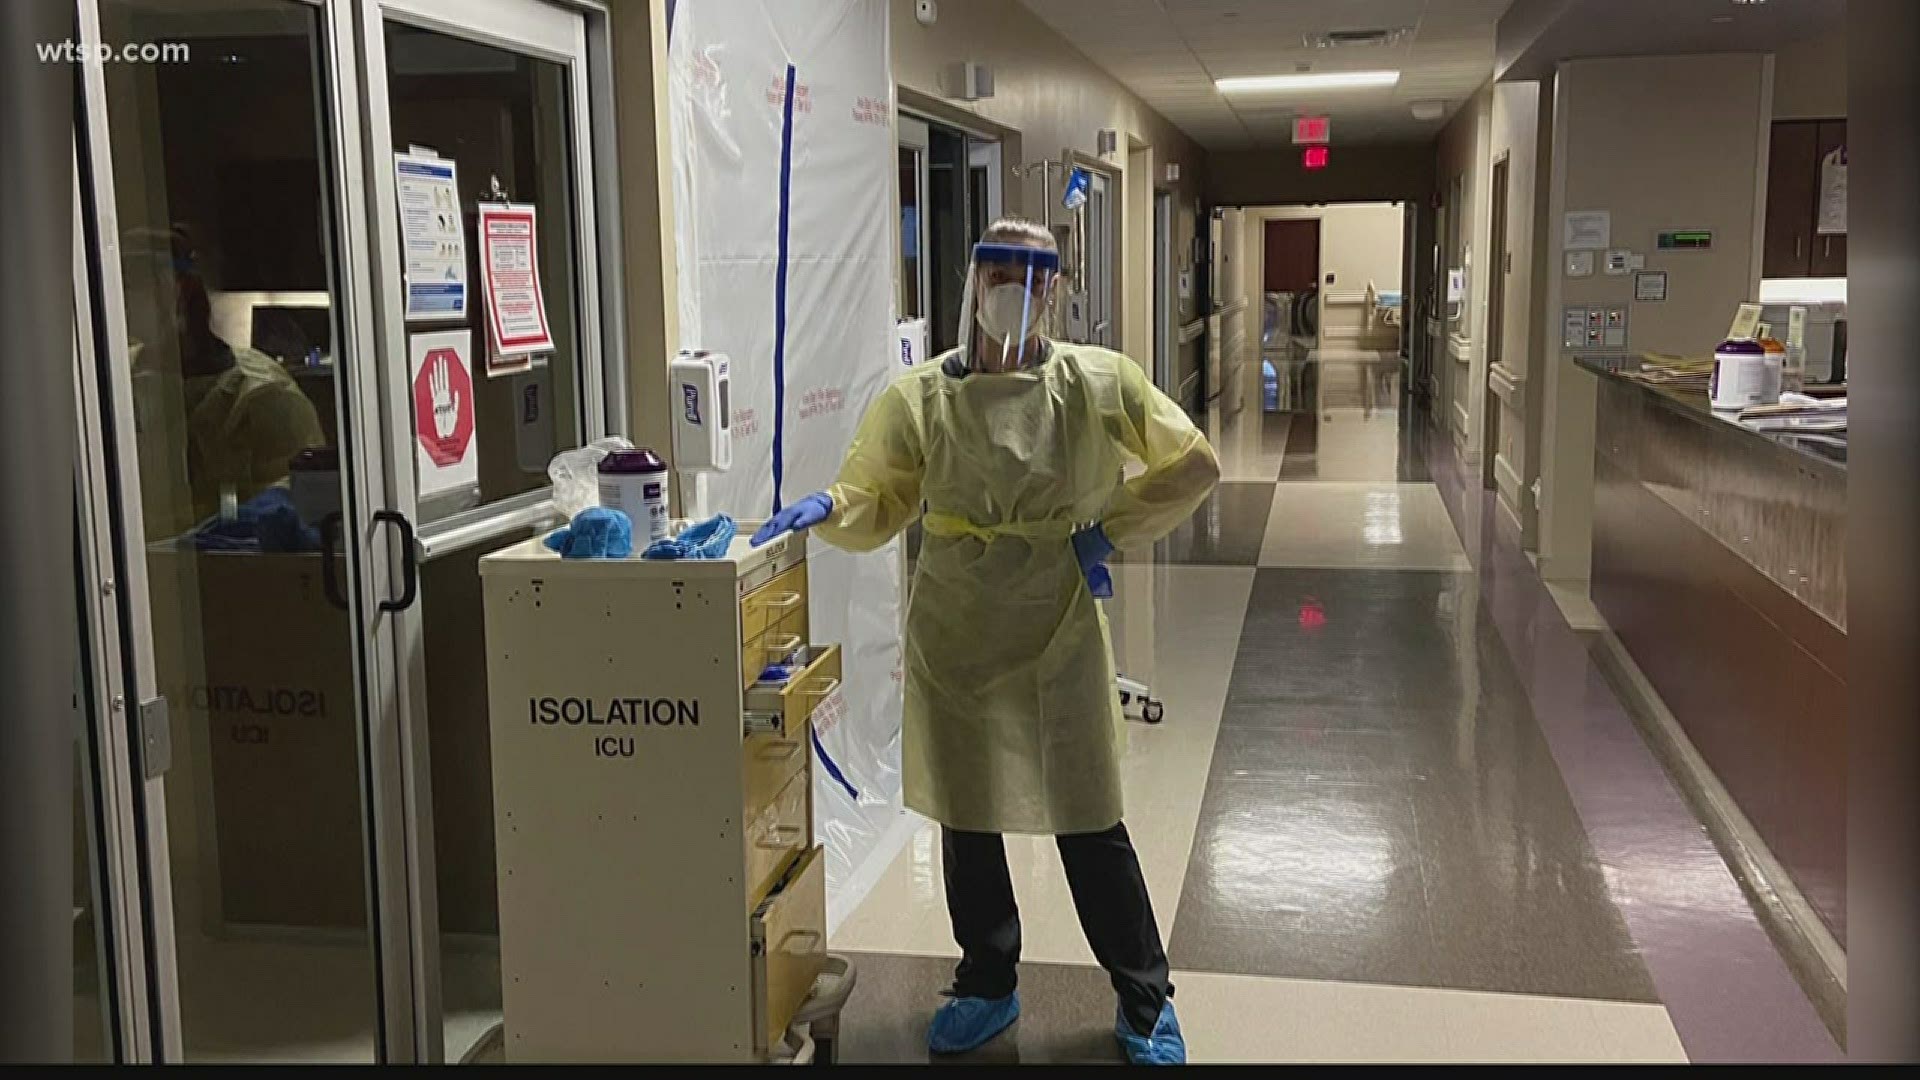 The couple is now based in a Boston hospital working 12-hour night shifts to help people keep breathing with coronavirus.